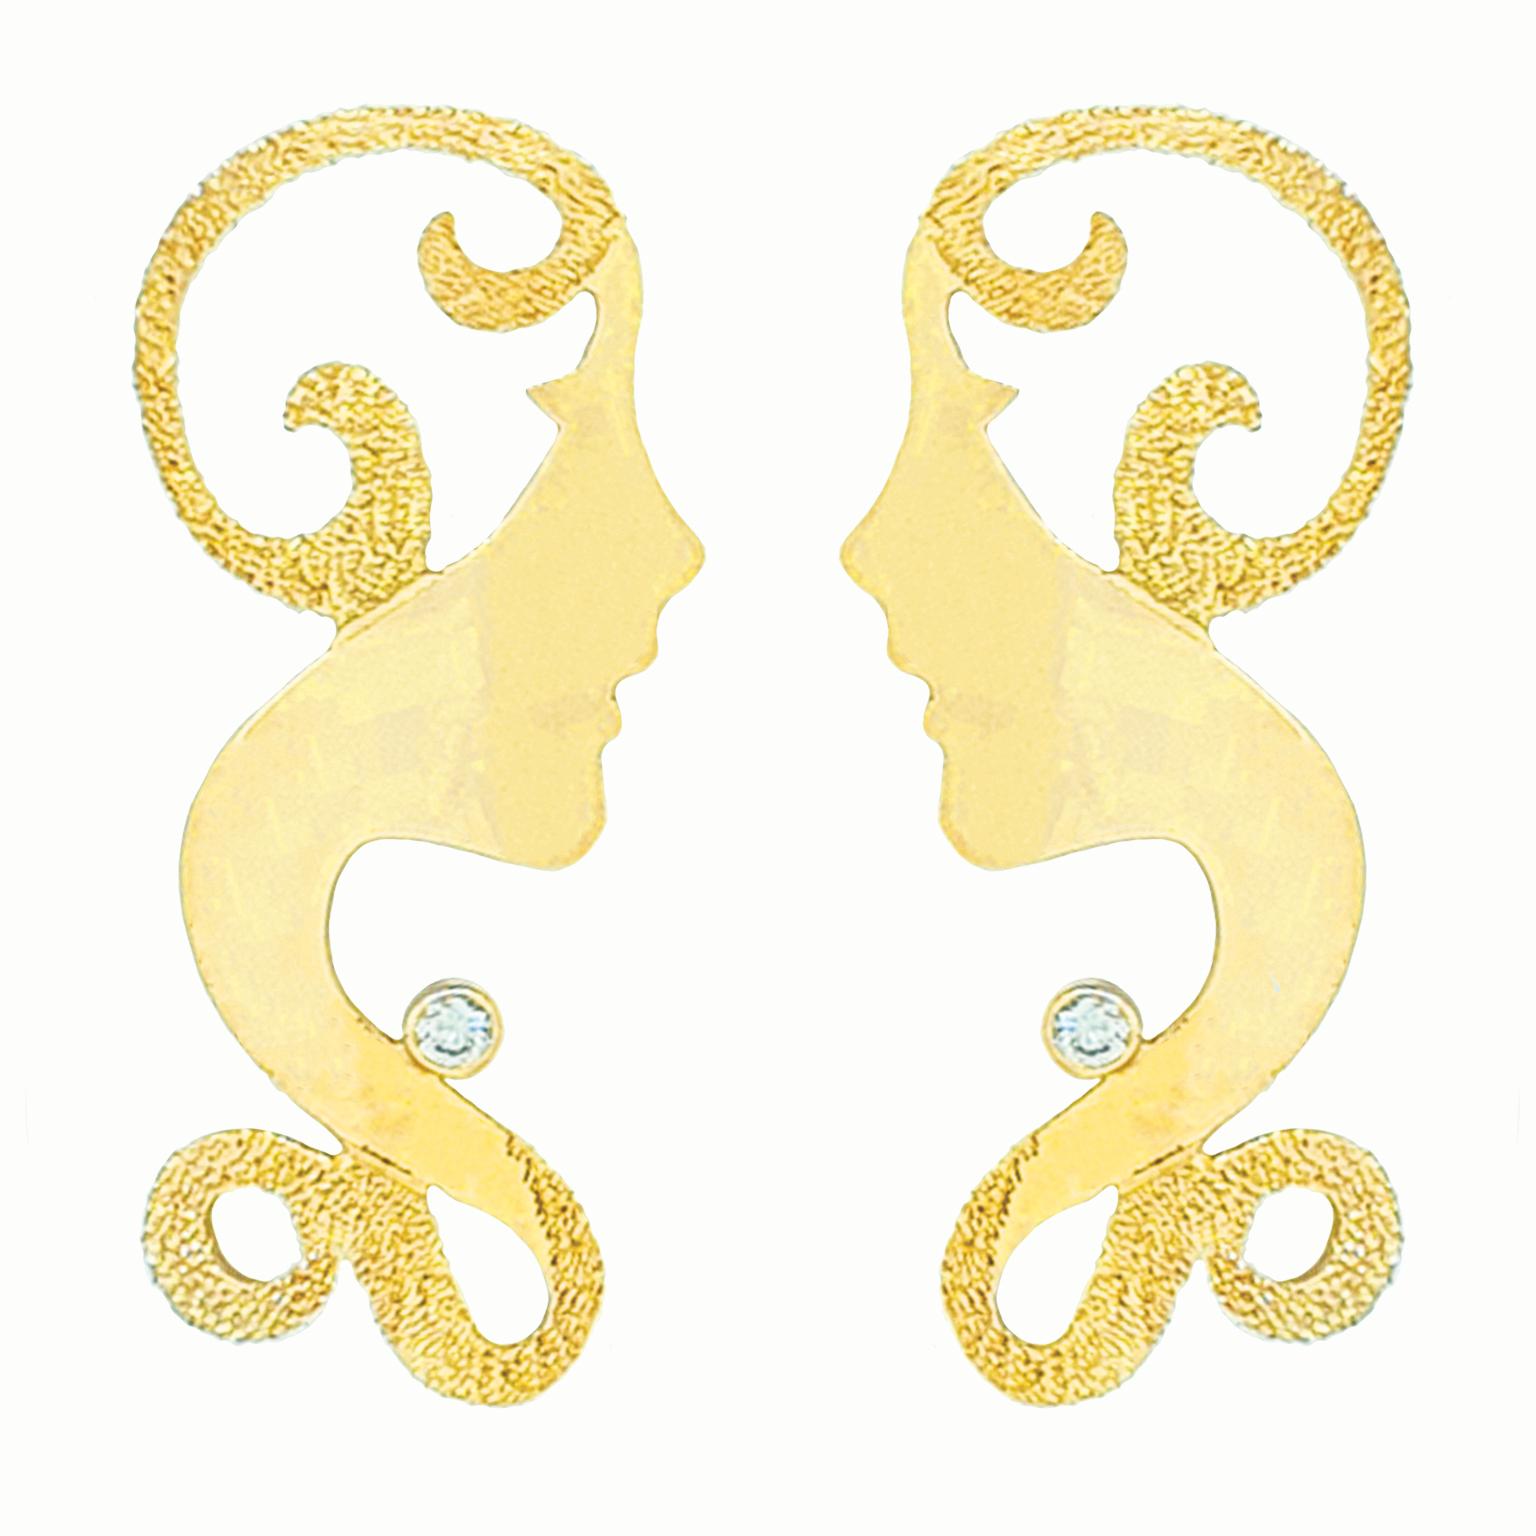 Paul Amey’s “Silhouette Ladies” earrings are totally unique and completely handcrafted and created by Paul Amey.  These earrings were crafted from 9K yellow gold and diamonds.  These “Silhouette Ladies” earrings are finished with highlights of Paul